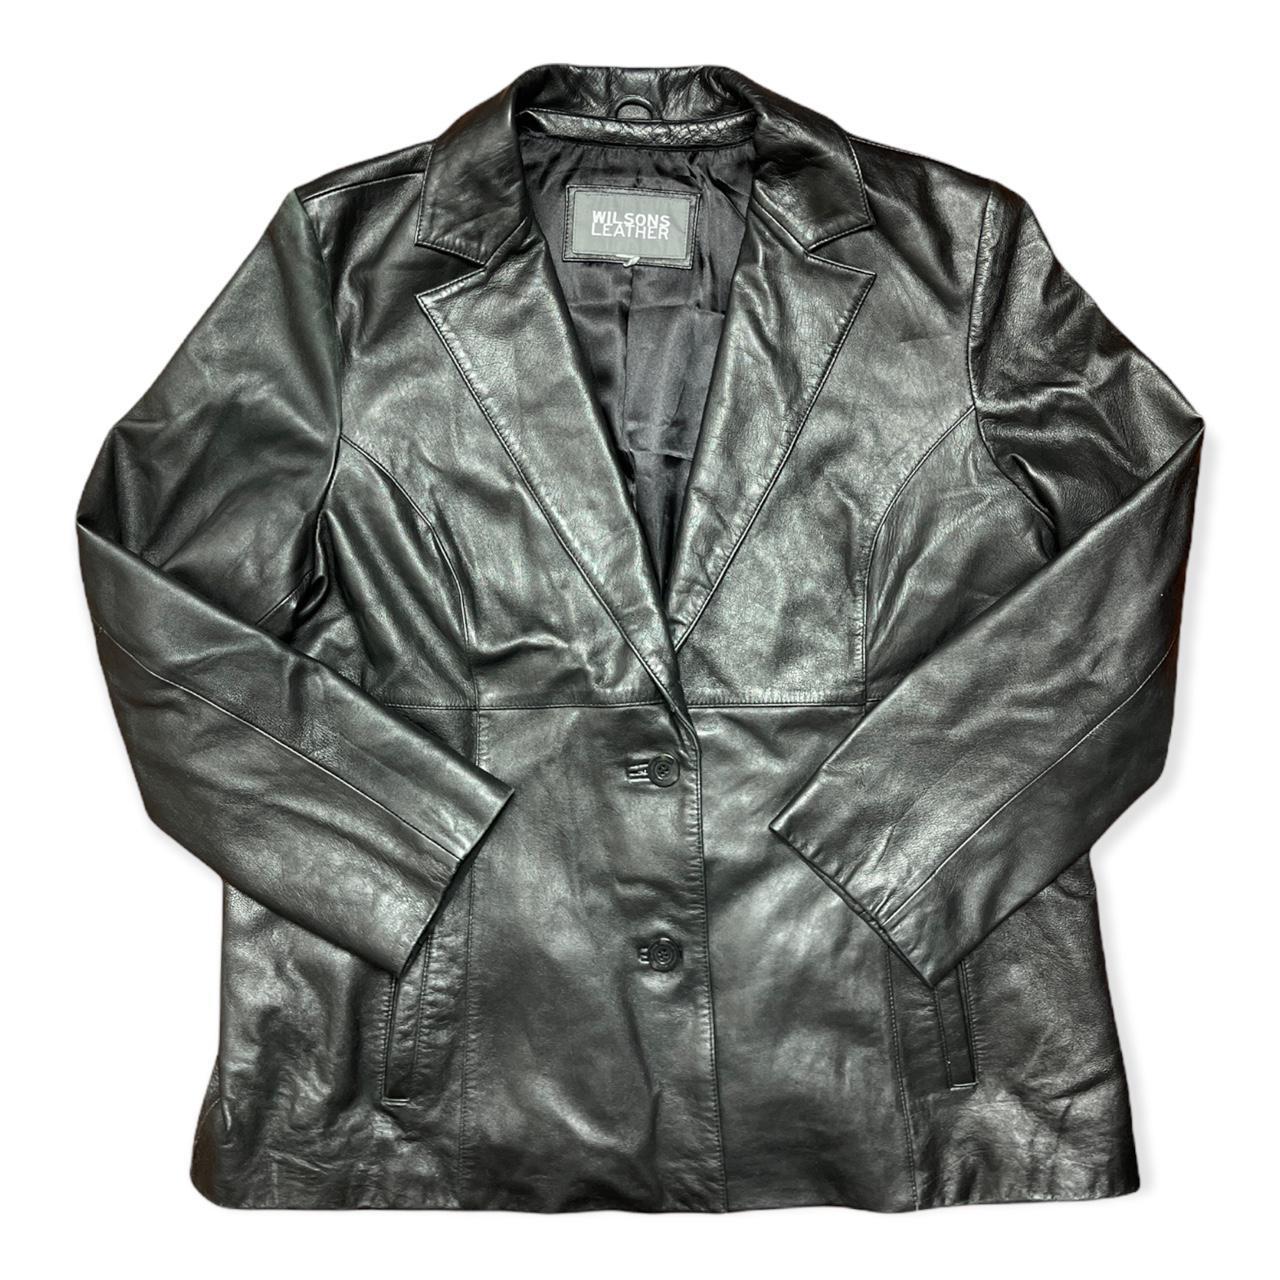 【SPECIAL】90s Aged Heavy Leather Jacketサイズは以下の通りです